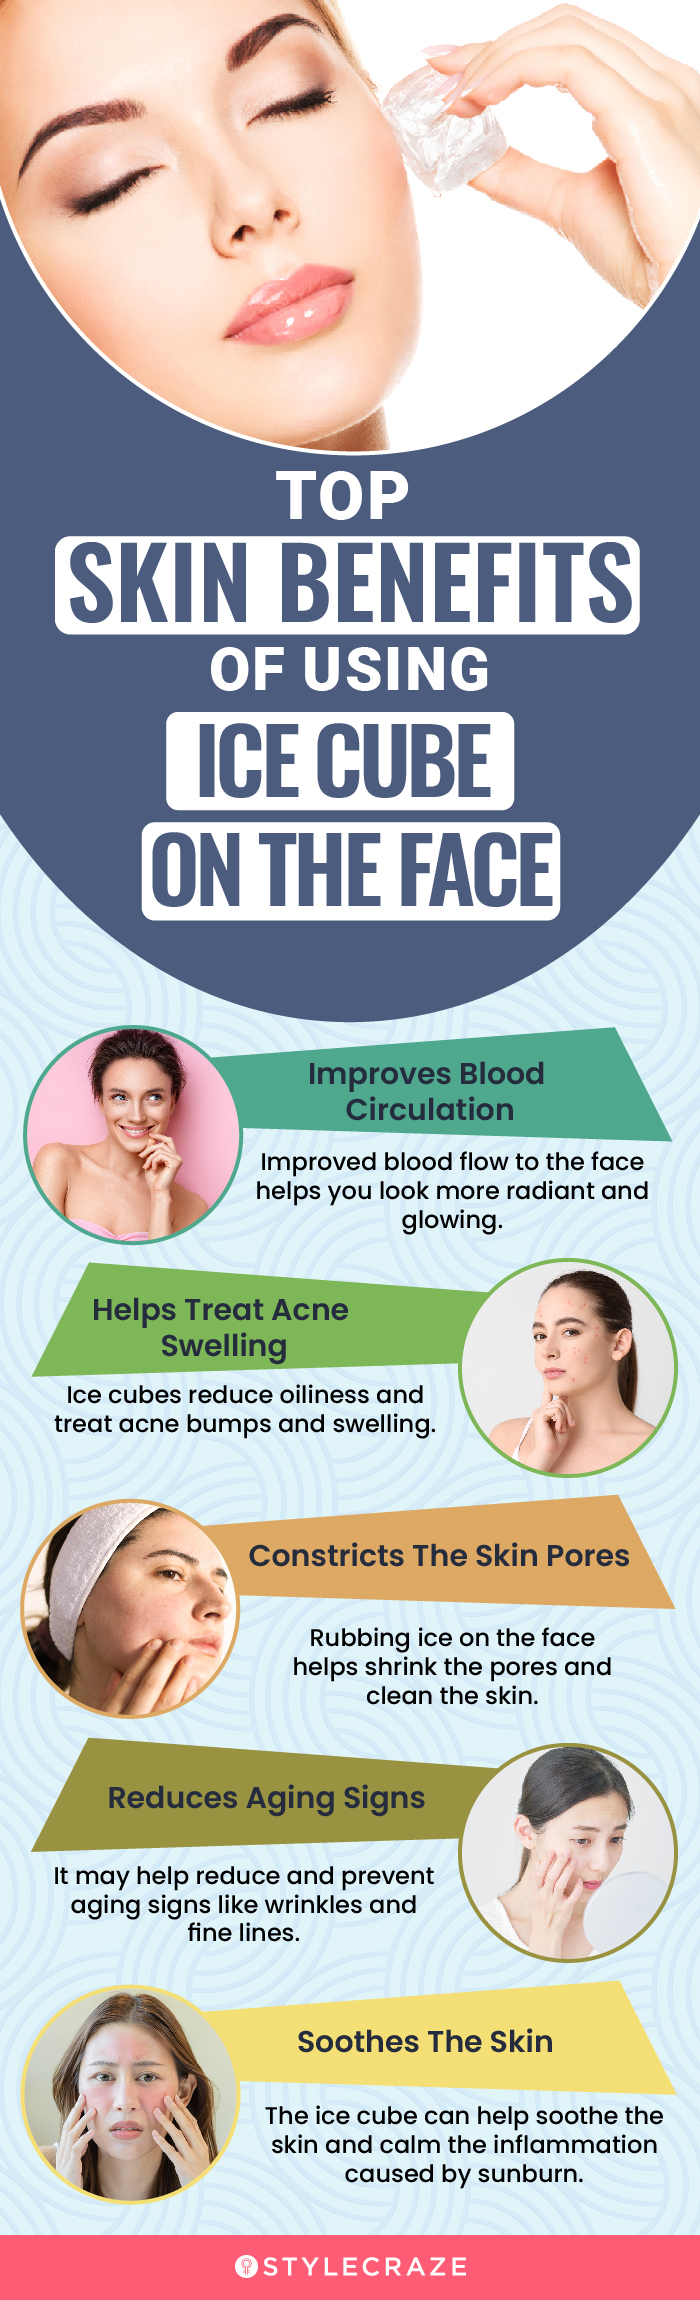 top skin benefits of using ice cube on the face [infographic]